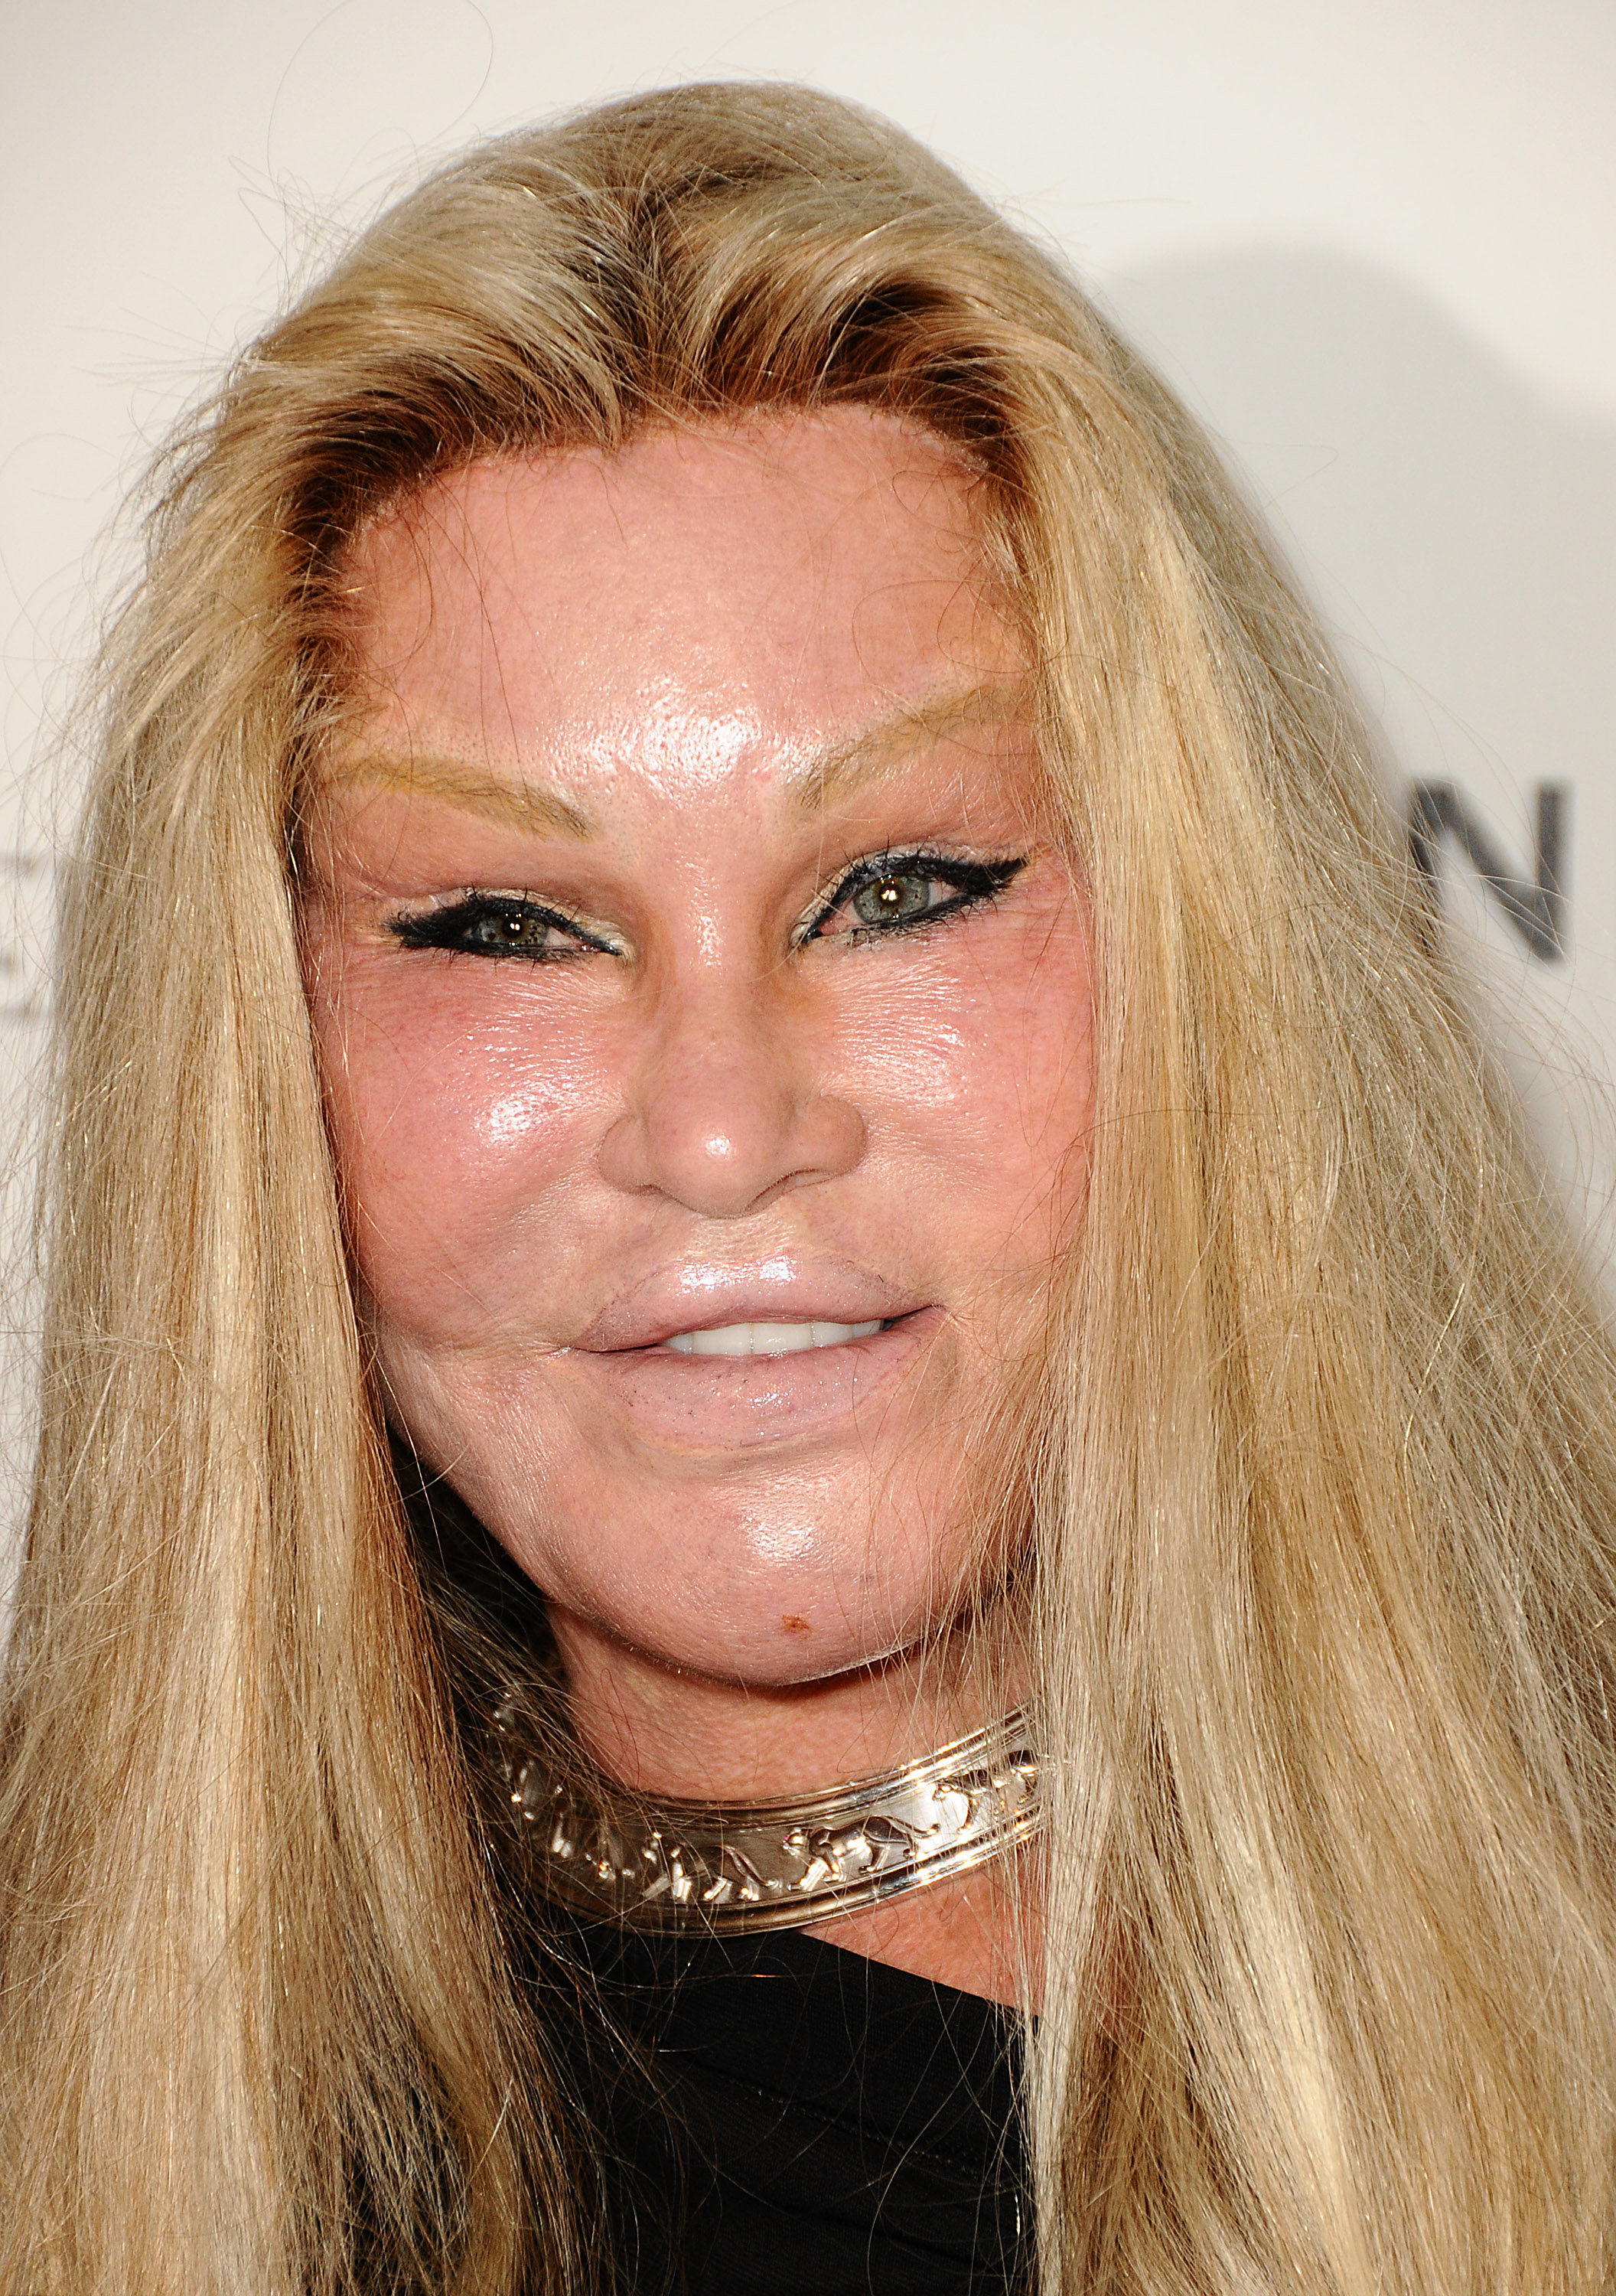 Jocelyn Wildenstein attends the after party for "Coco Before Chanel" at Chanel Boutique in Beverly Hills, California, on September 9, 2009. | Source: Getty Images